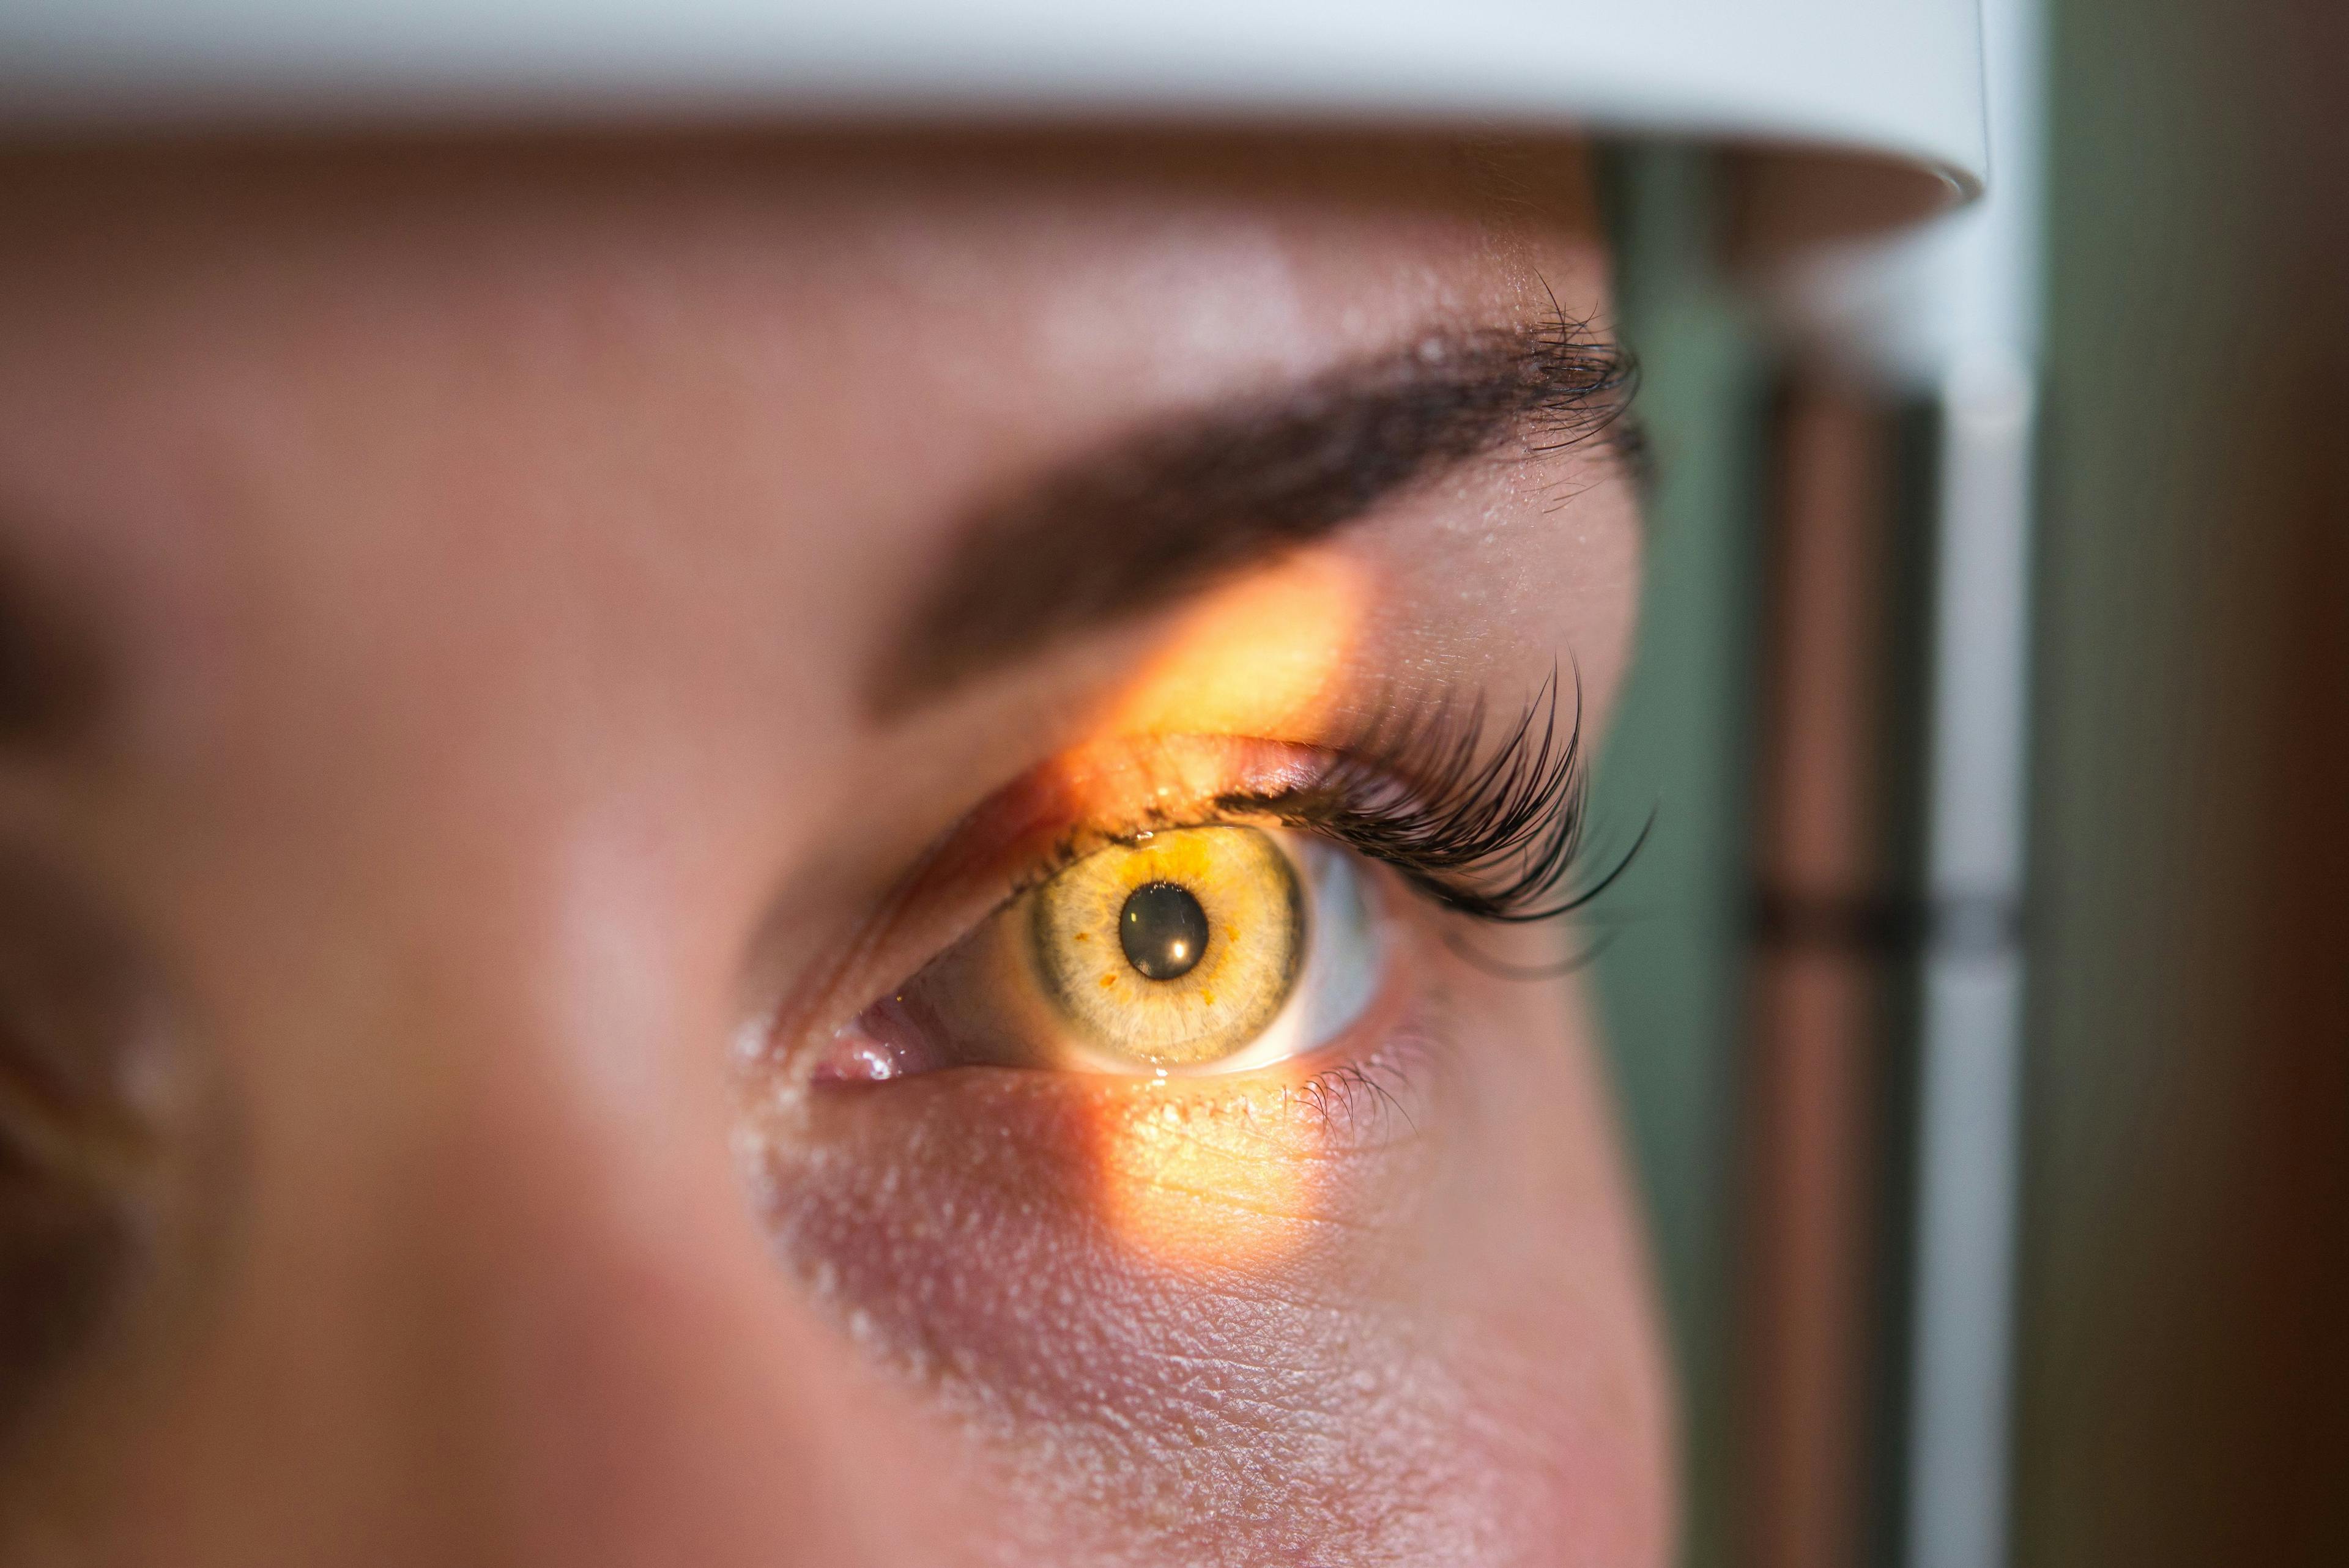 The clinical trials of the ophthalmic gel showed that patients treated with IHEEZO did not require any supplemental treatment to complete the intended surgical procedure. (Adobe Stock image)